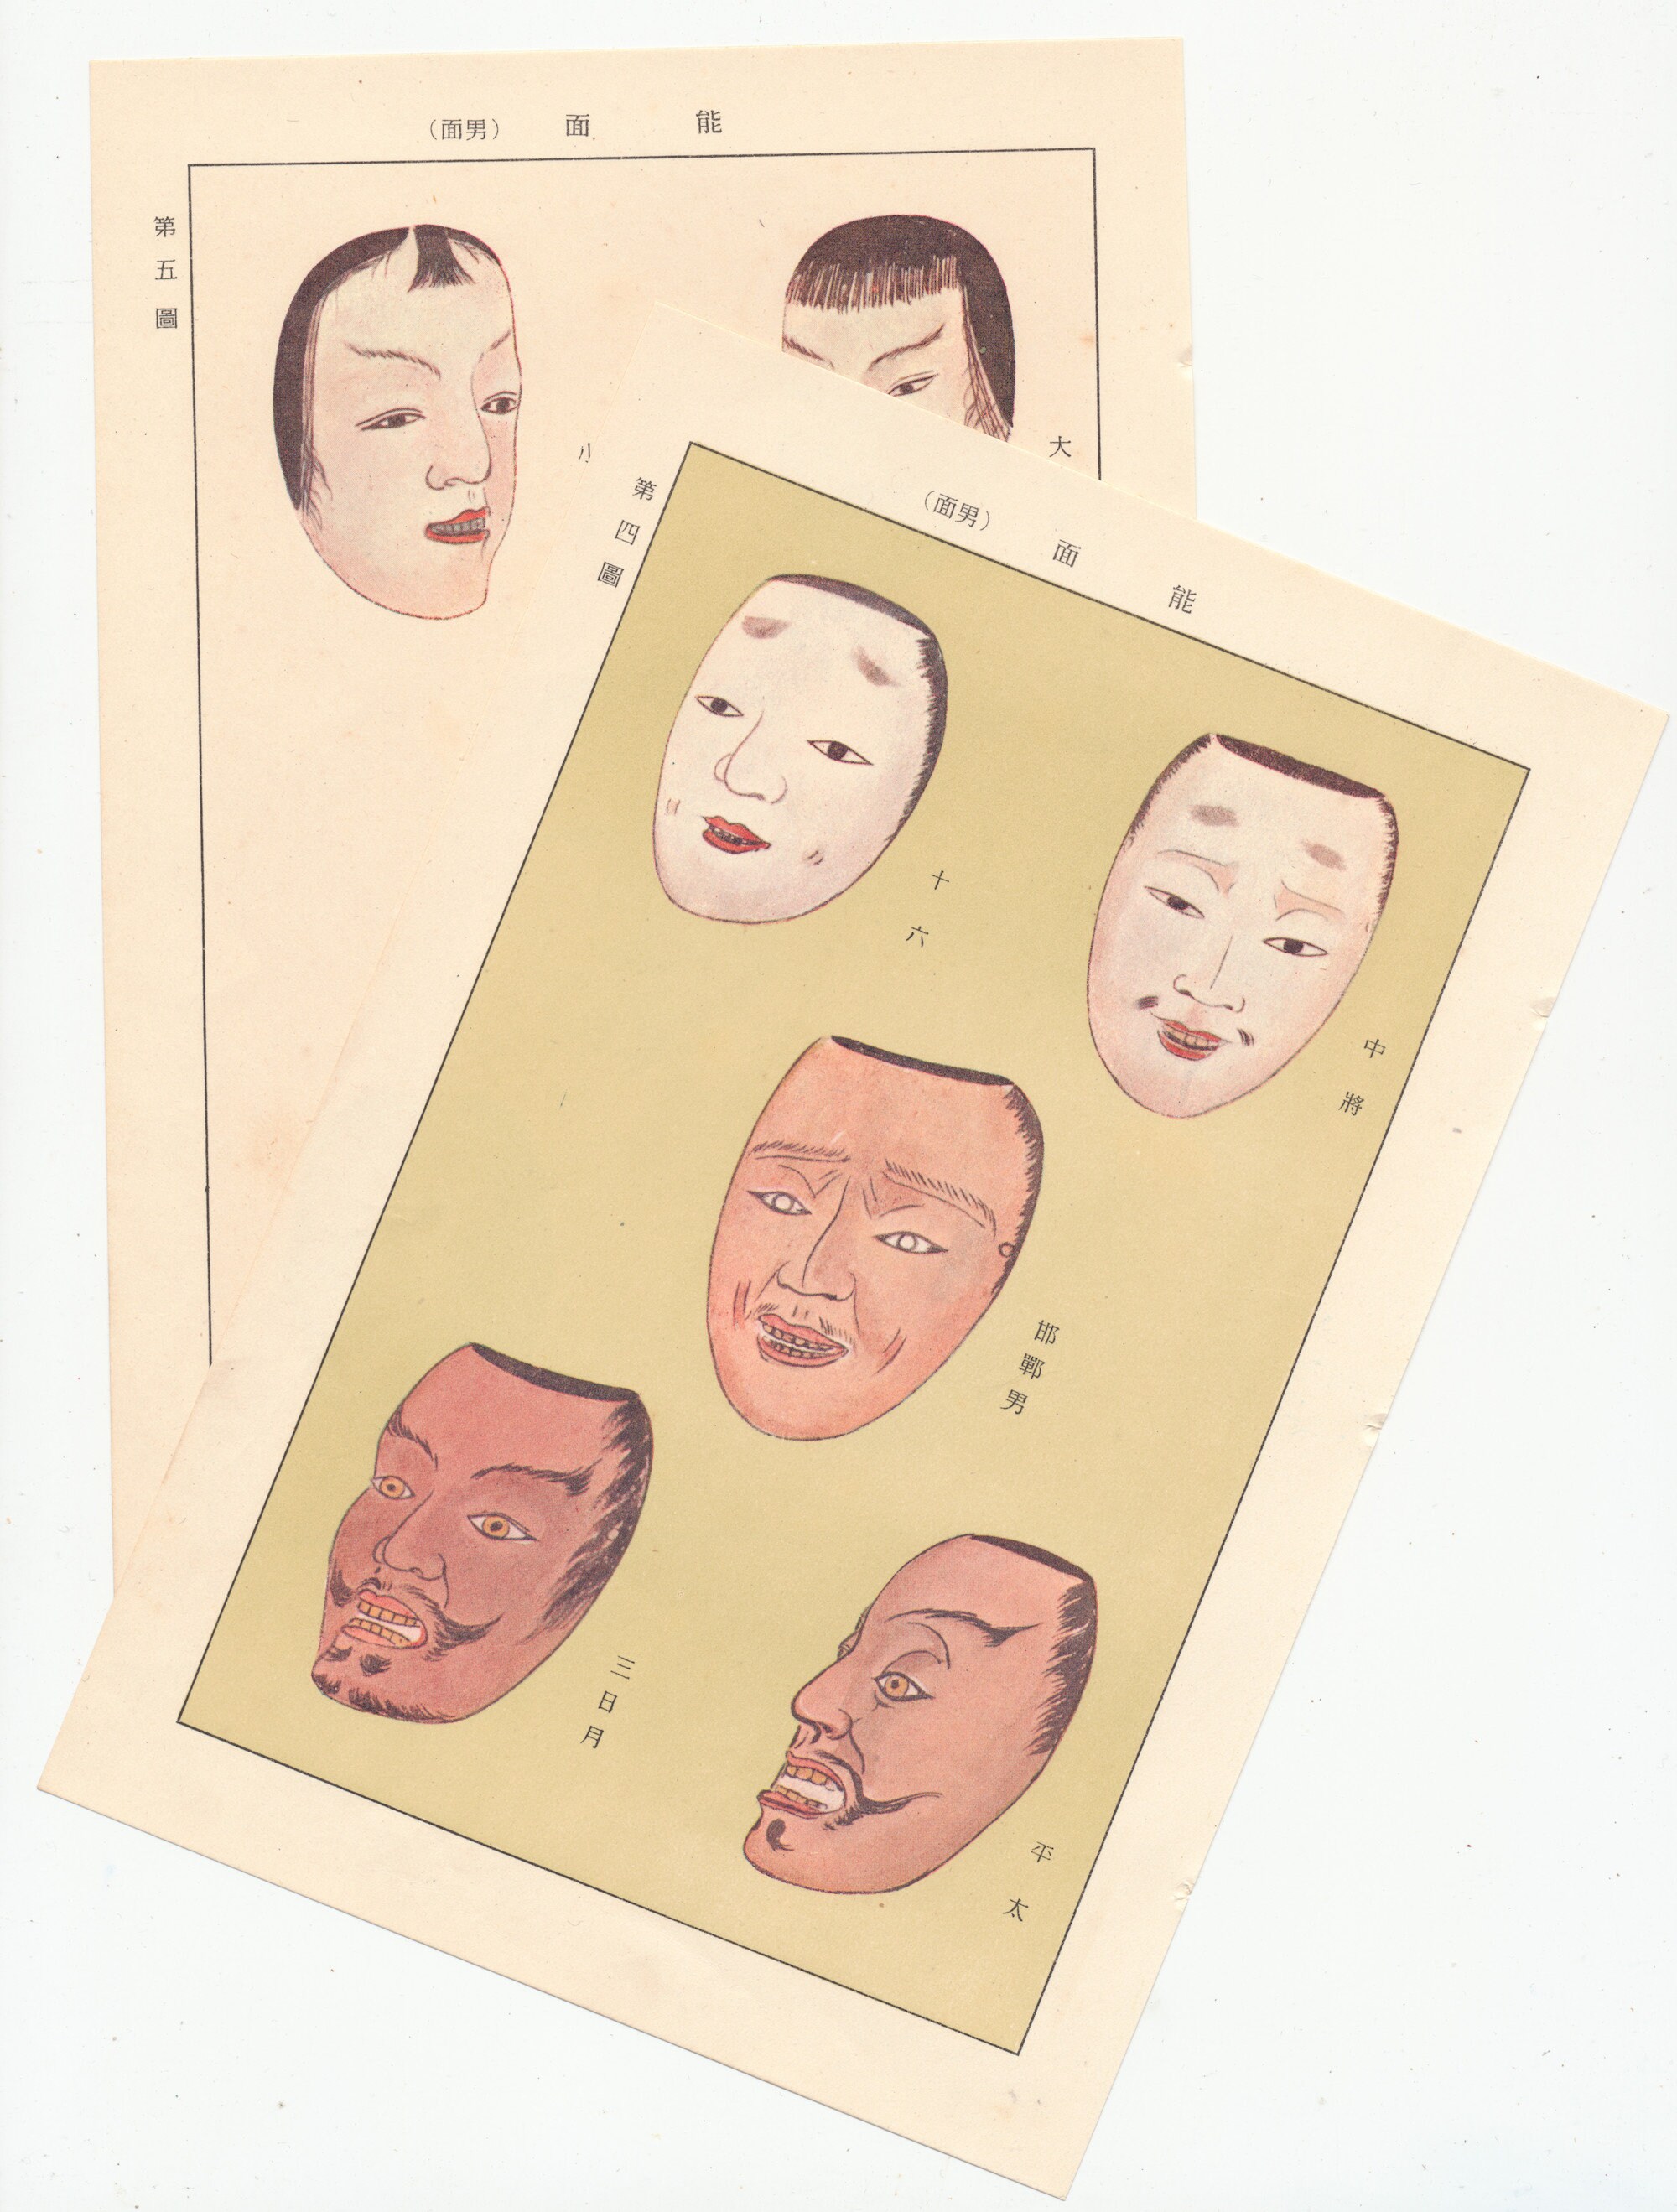 Shrove Tuesday - Two theatrical masks with different expressions